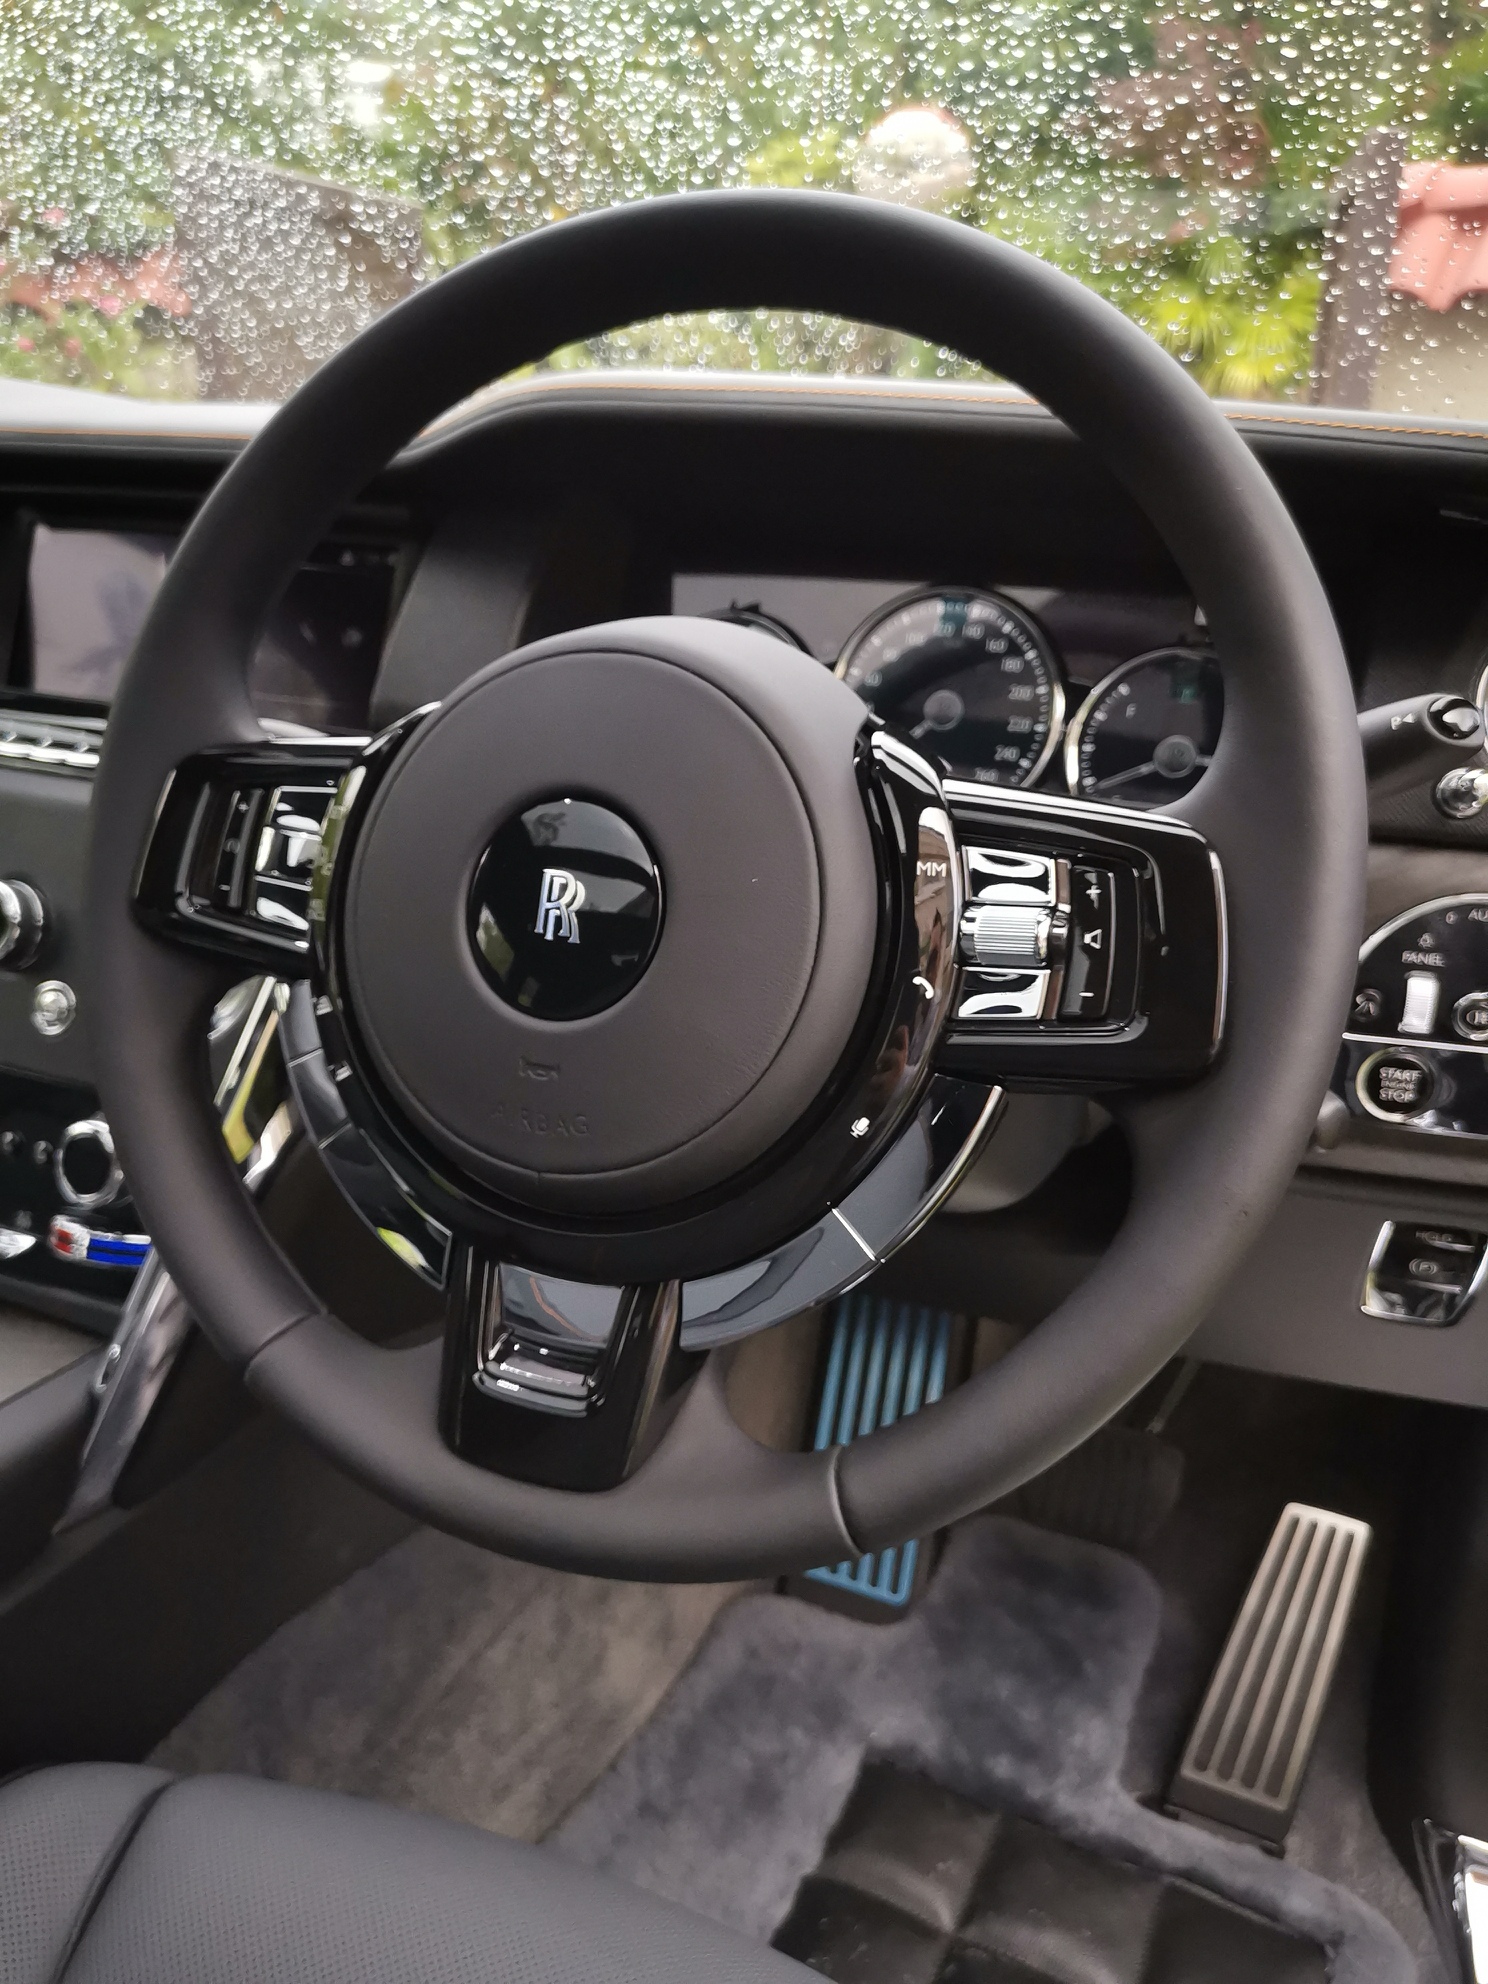 The luxurious interiors of the Cullinan 